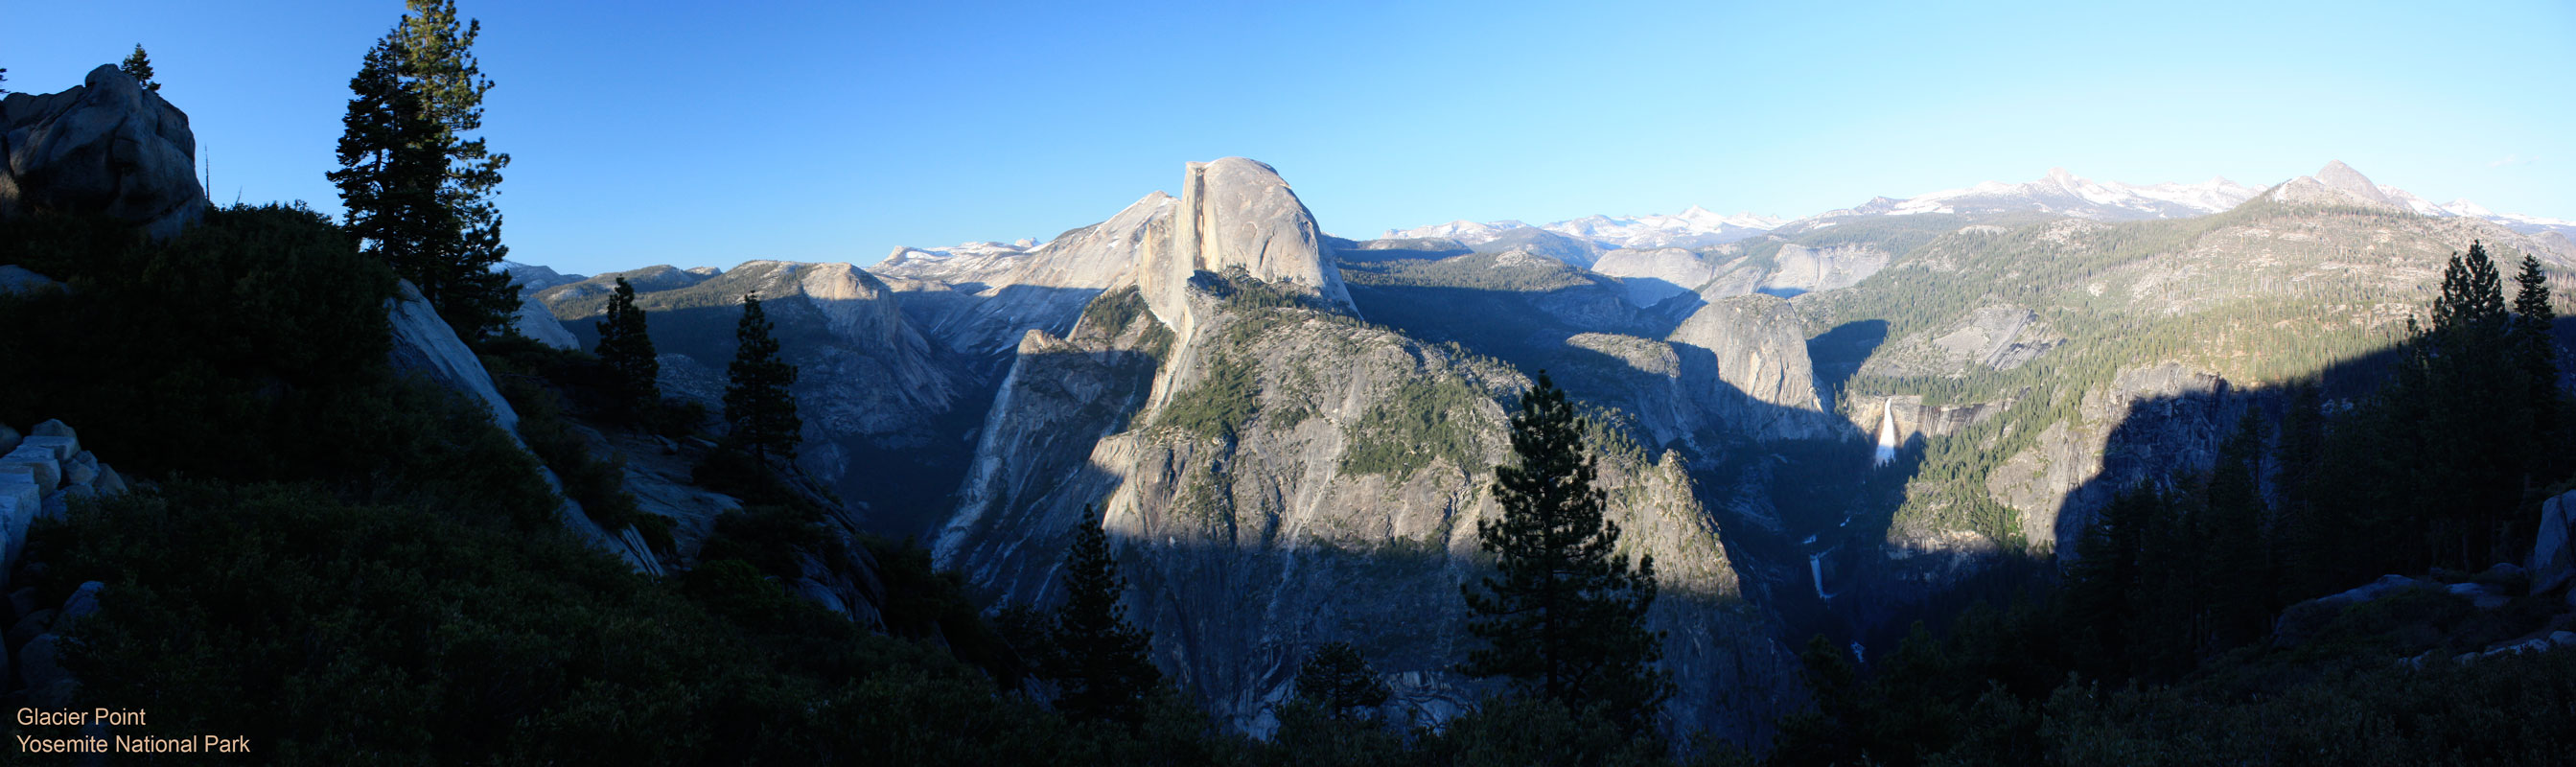 View from Glacier Point, Yosemite